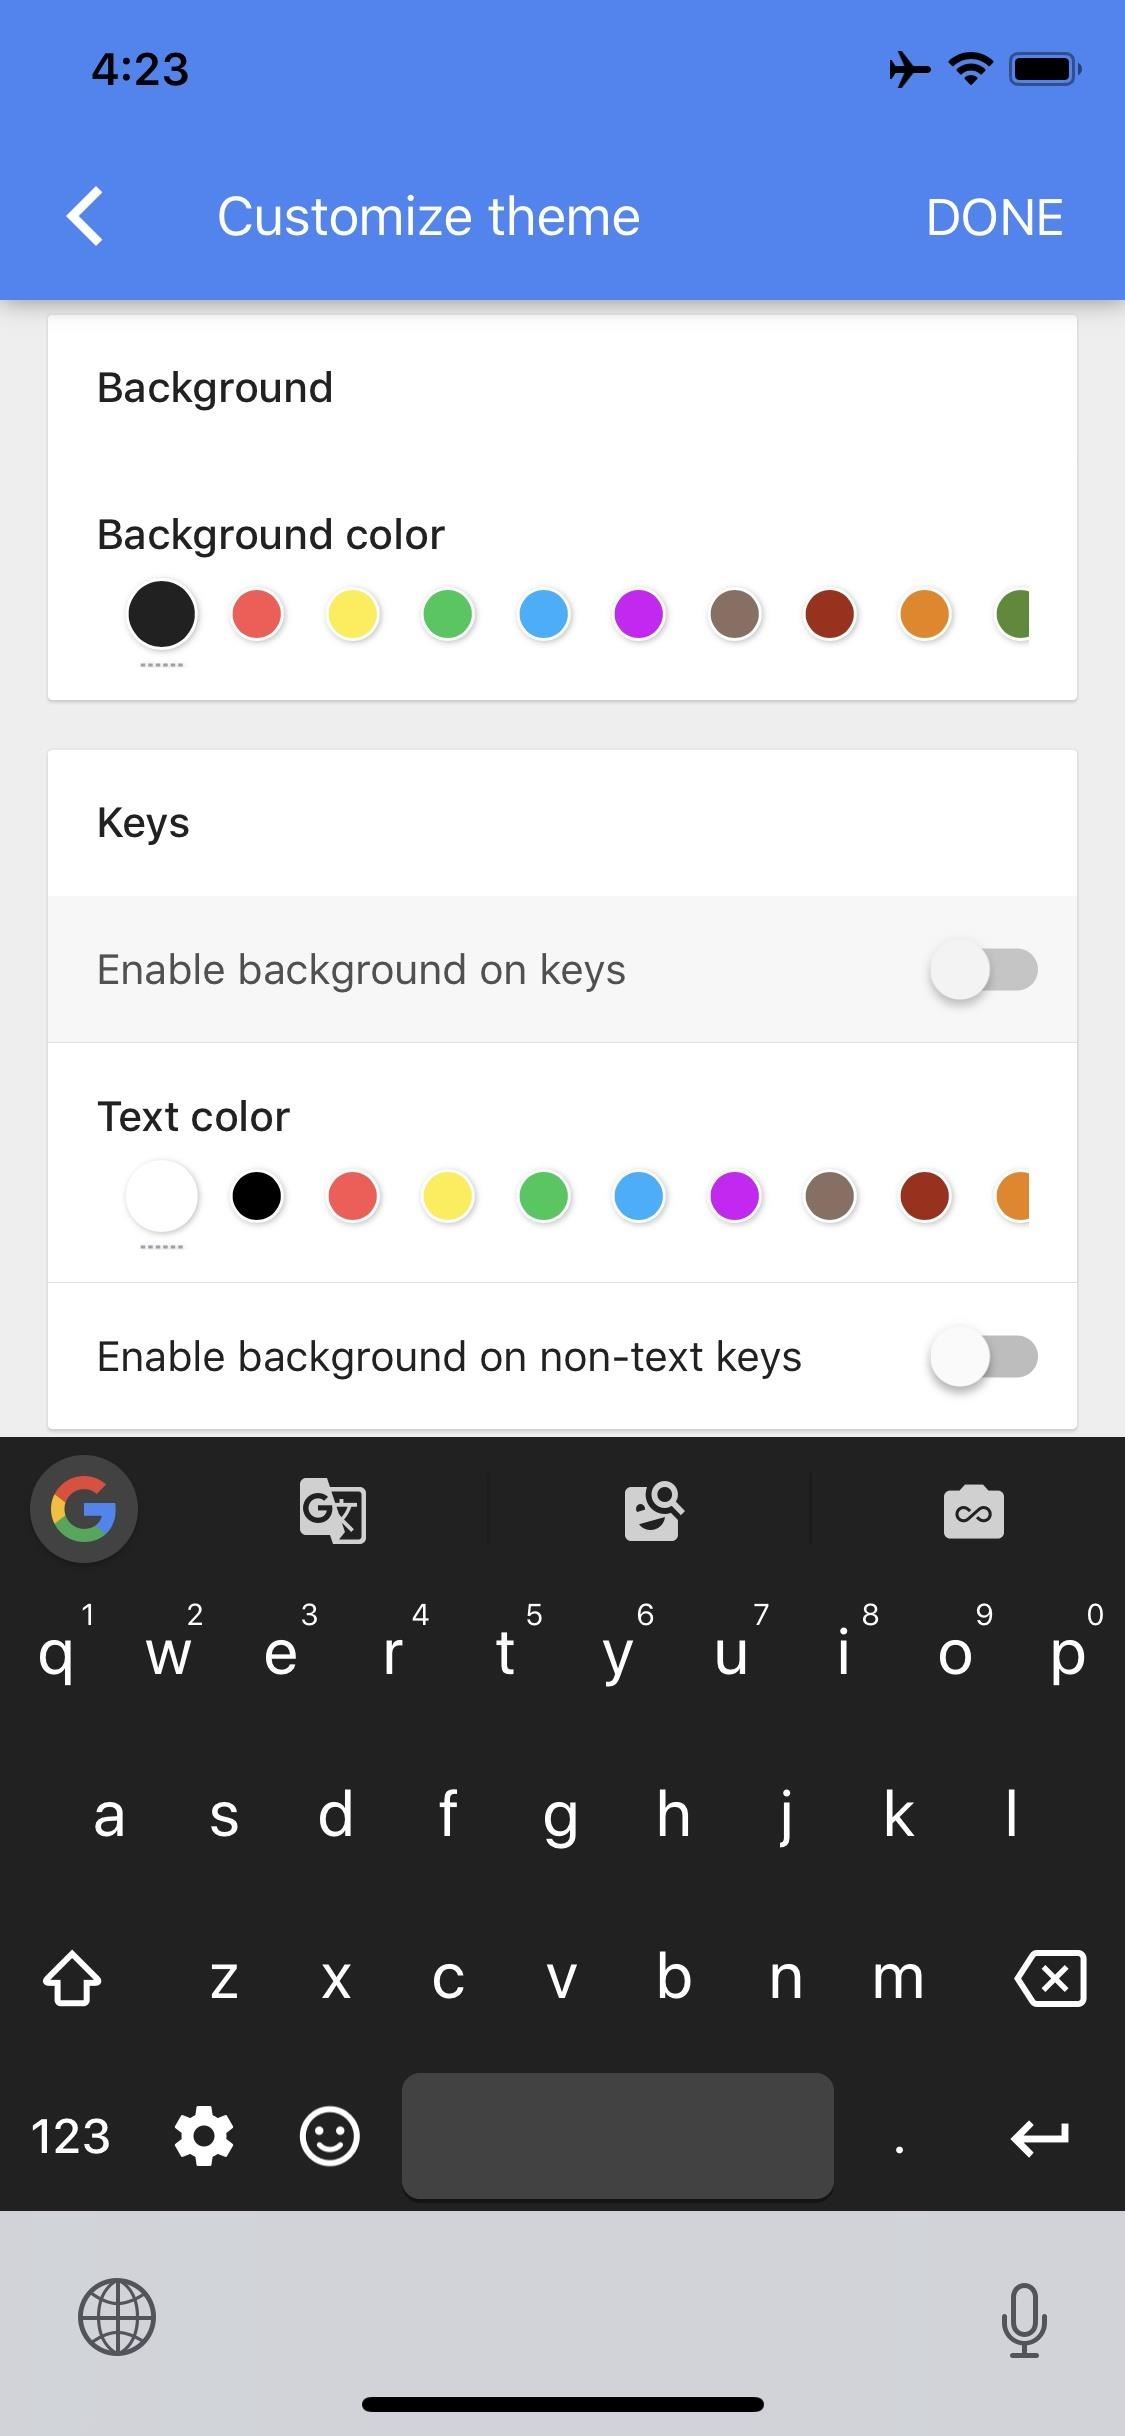 How to Get a Dark Theme on Gboard for iPhone or Android